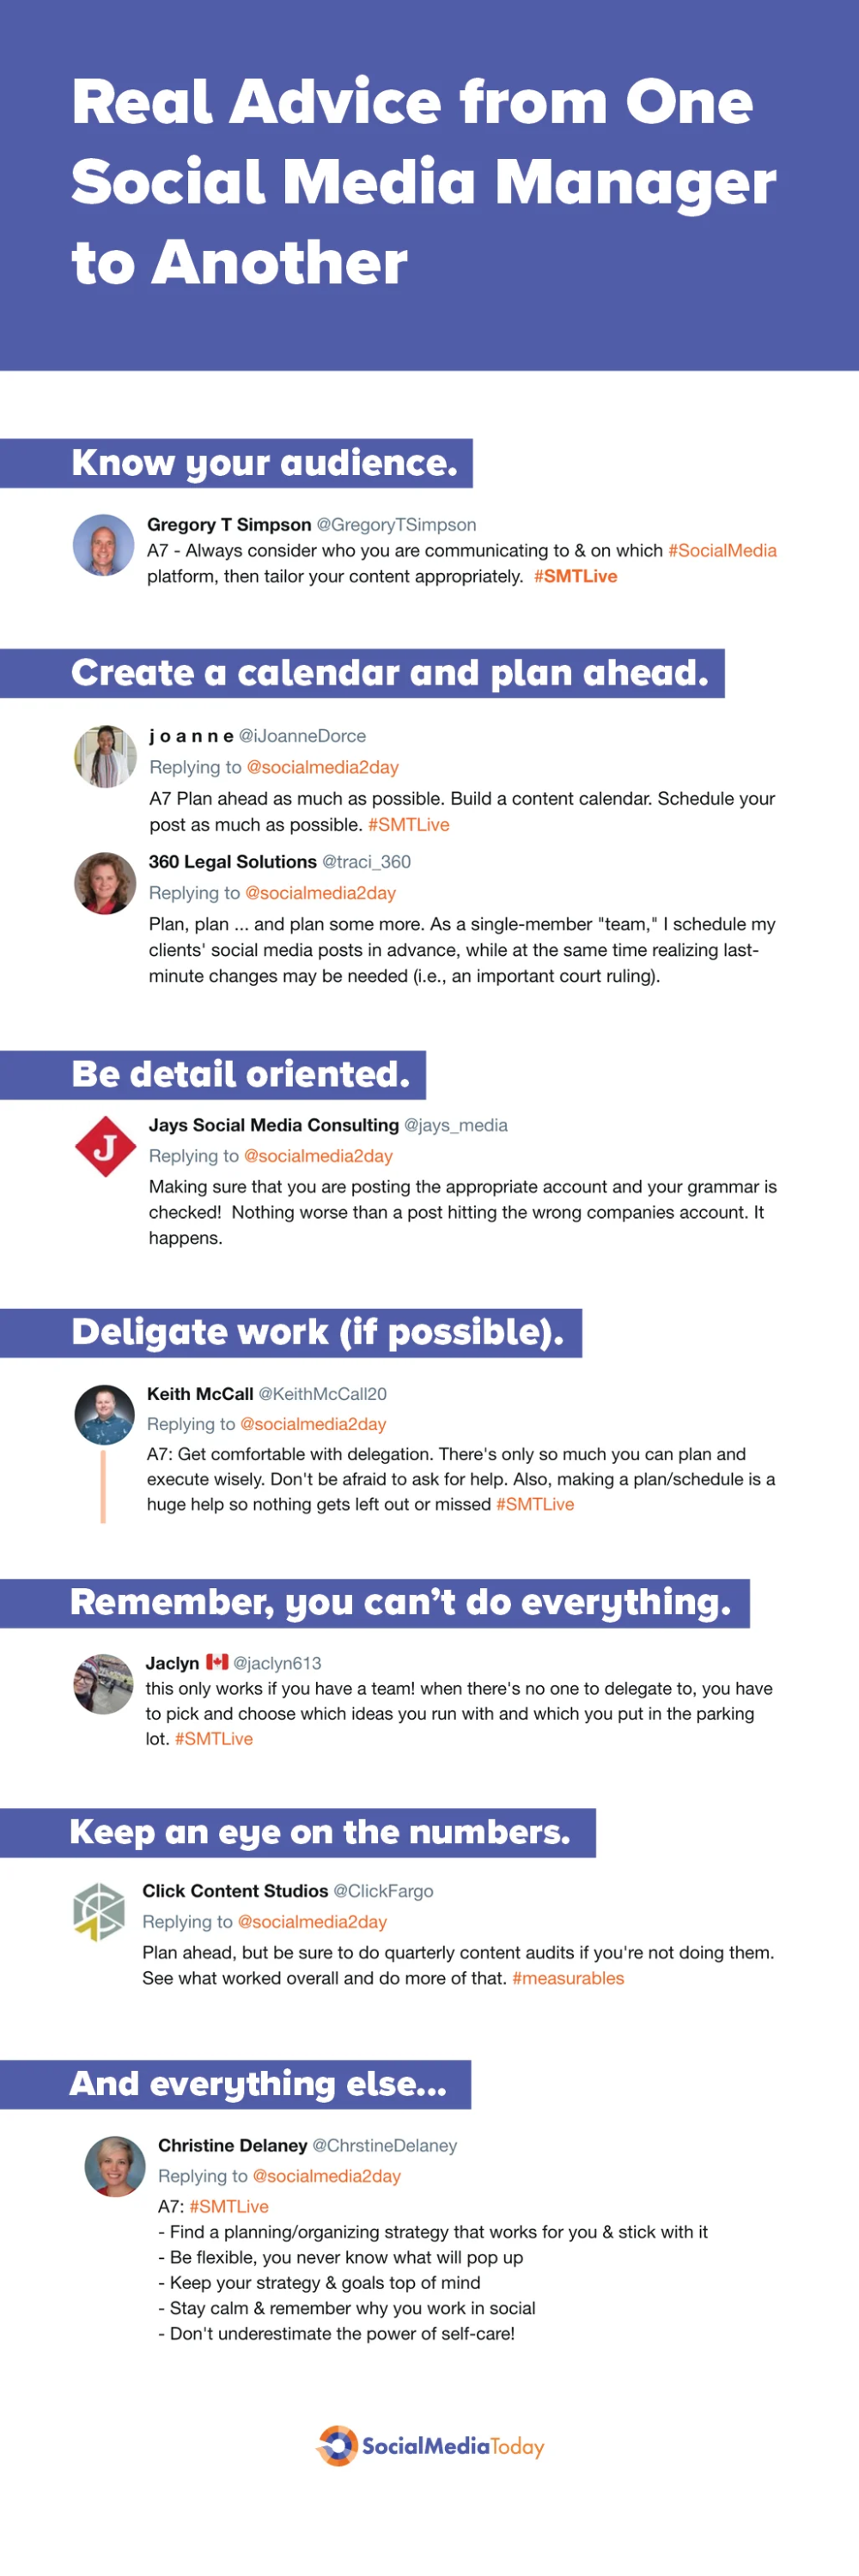 Infografia - Real Advice from One Social Media Manager to Another [Infographic]